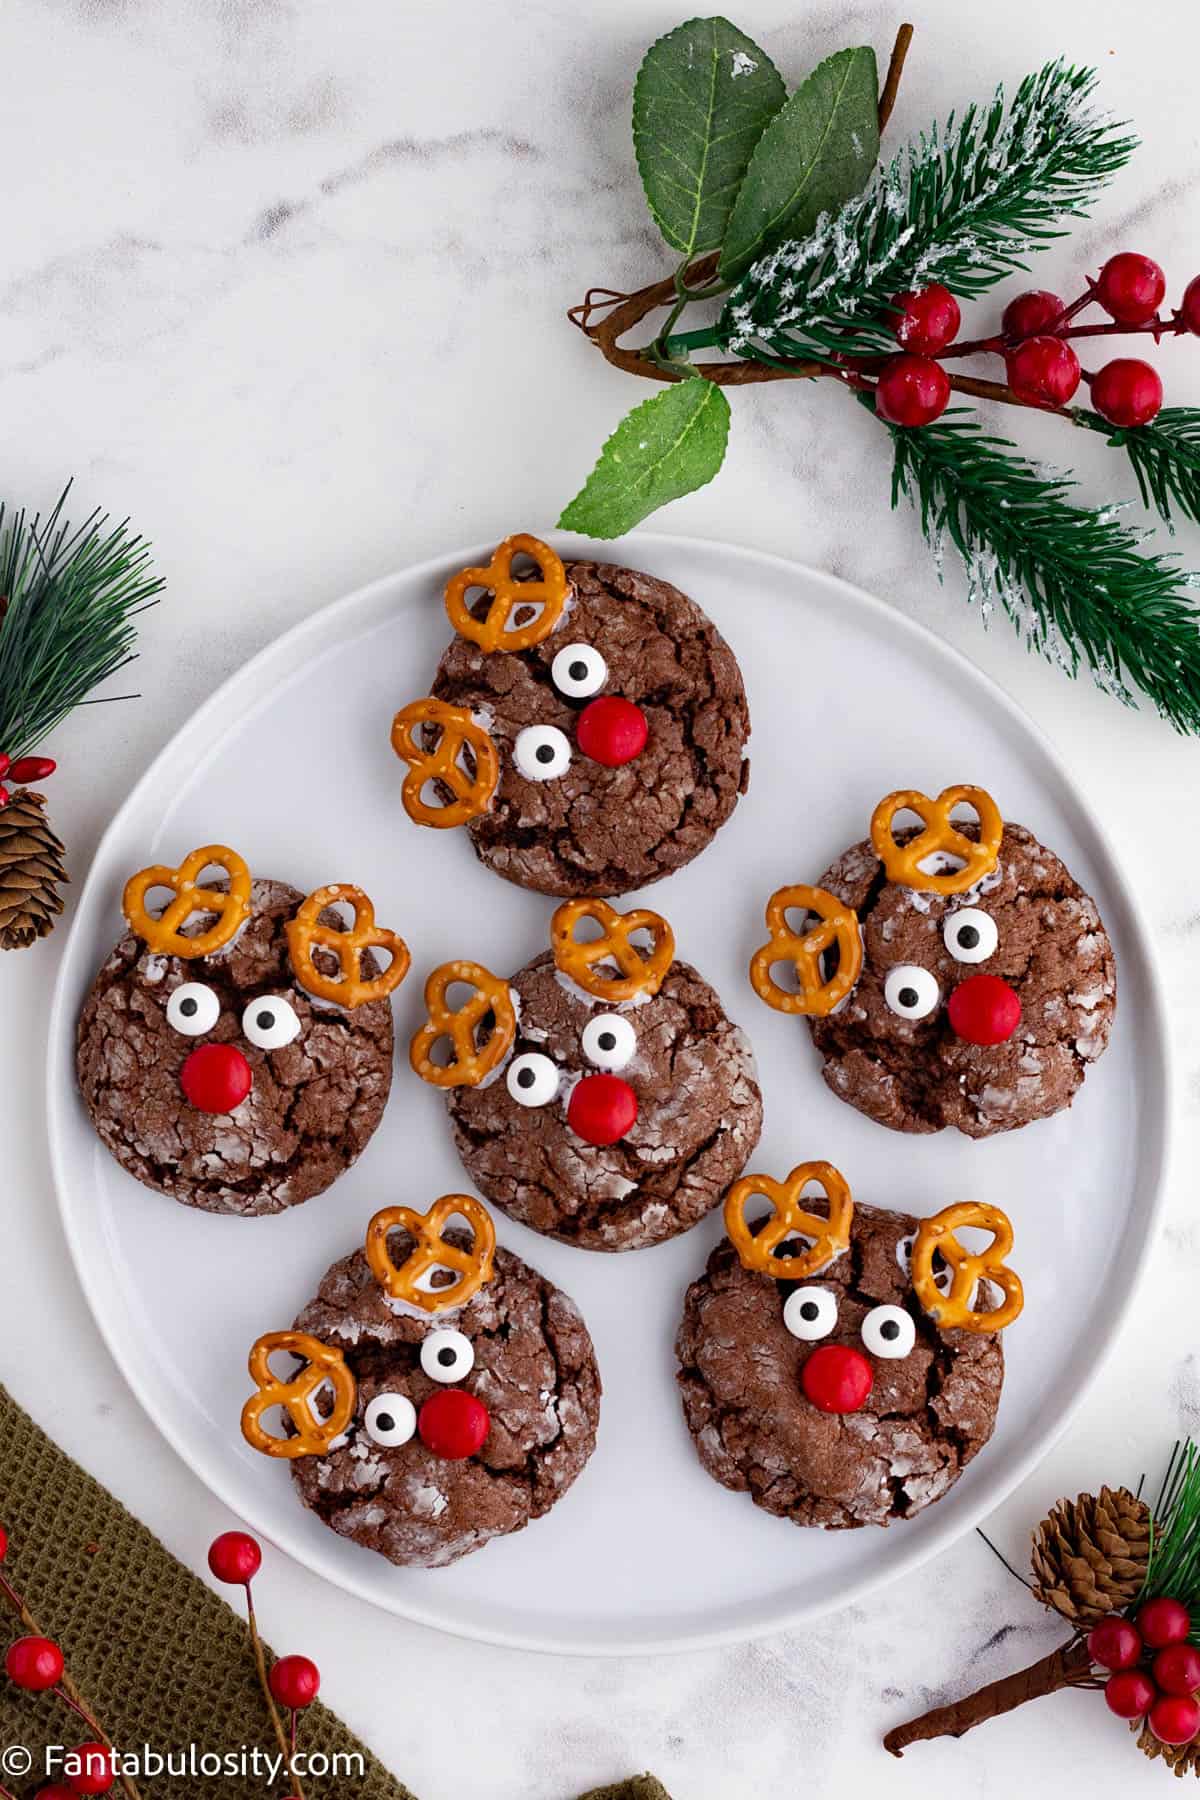 A round white plate holds 6 round chocolate cookies that have been decorated to look like reindeer faces